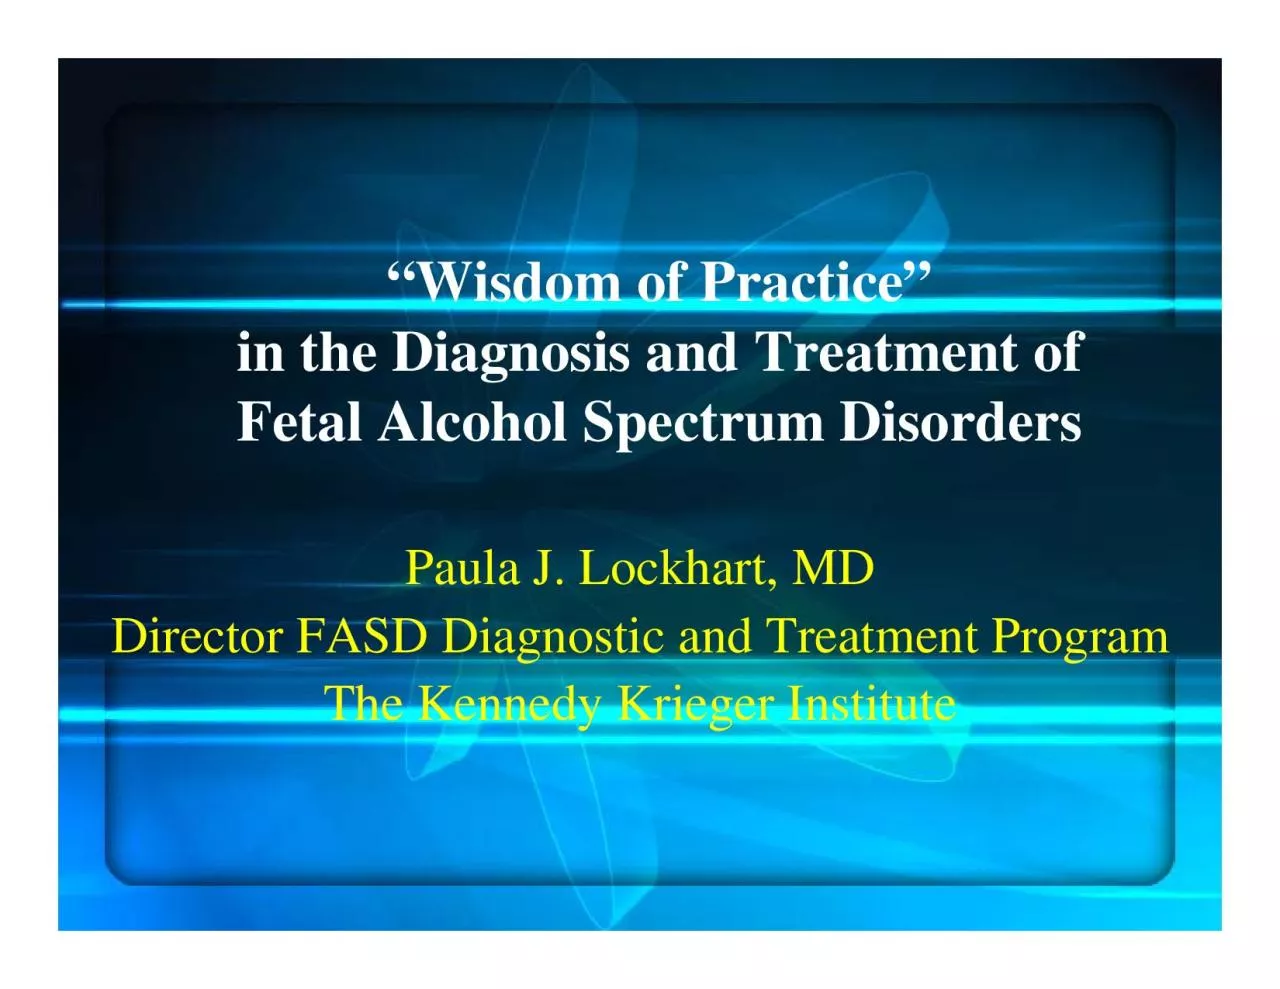 147Wisdom of Practice148 in the Diagnosis and Treatment of Fetal